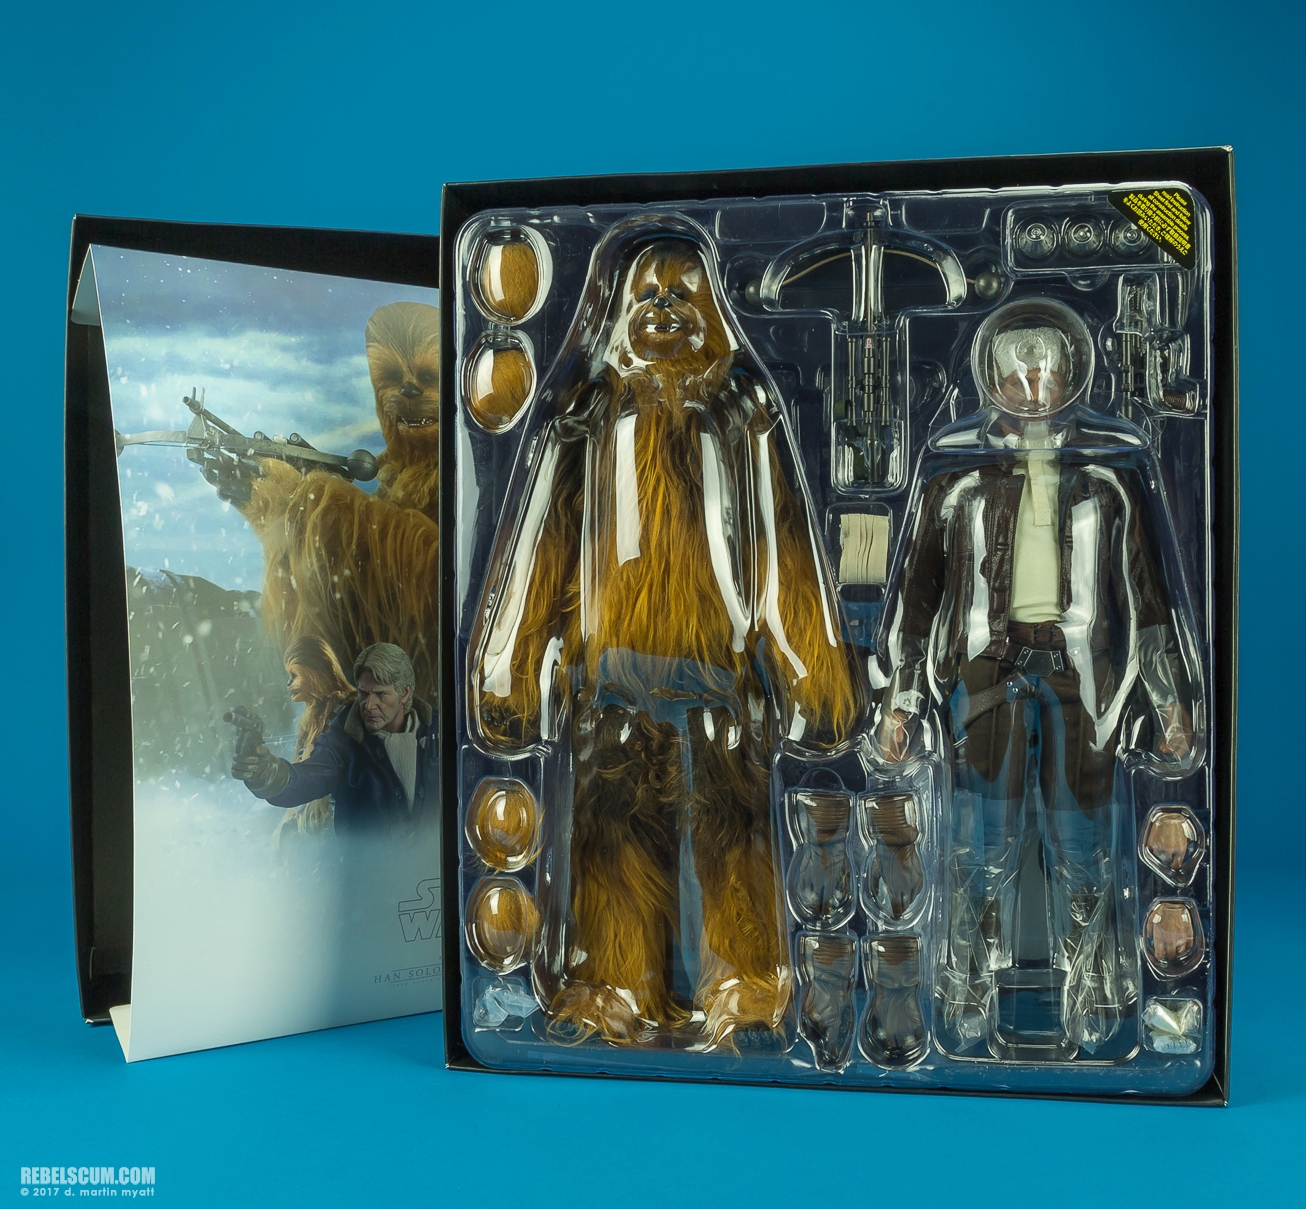 MMS376-Han-Solo-Chewbacca-The-Force-Awakens-Hot-Toys-044.jpg